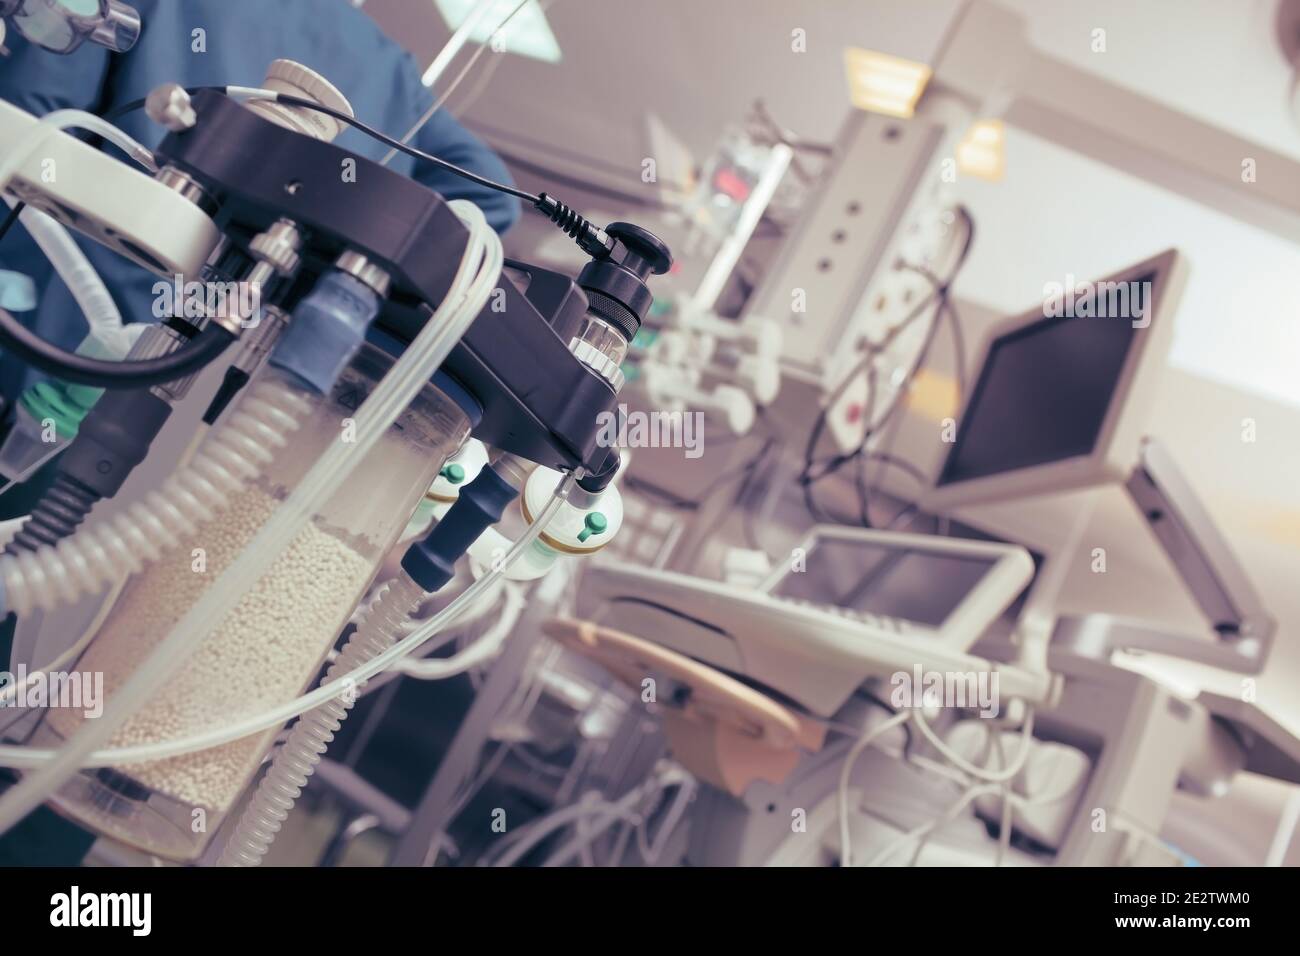 View of the modern operating room with equipment and appliances Stock Photo